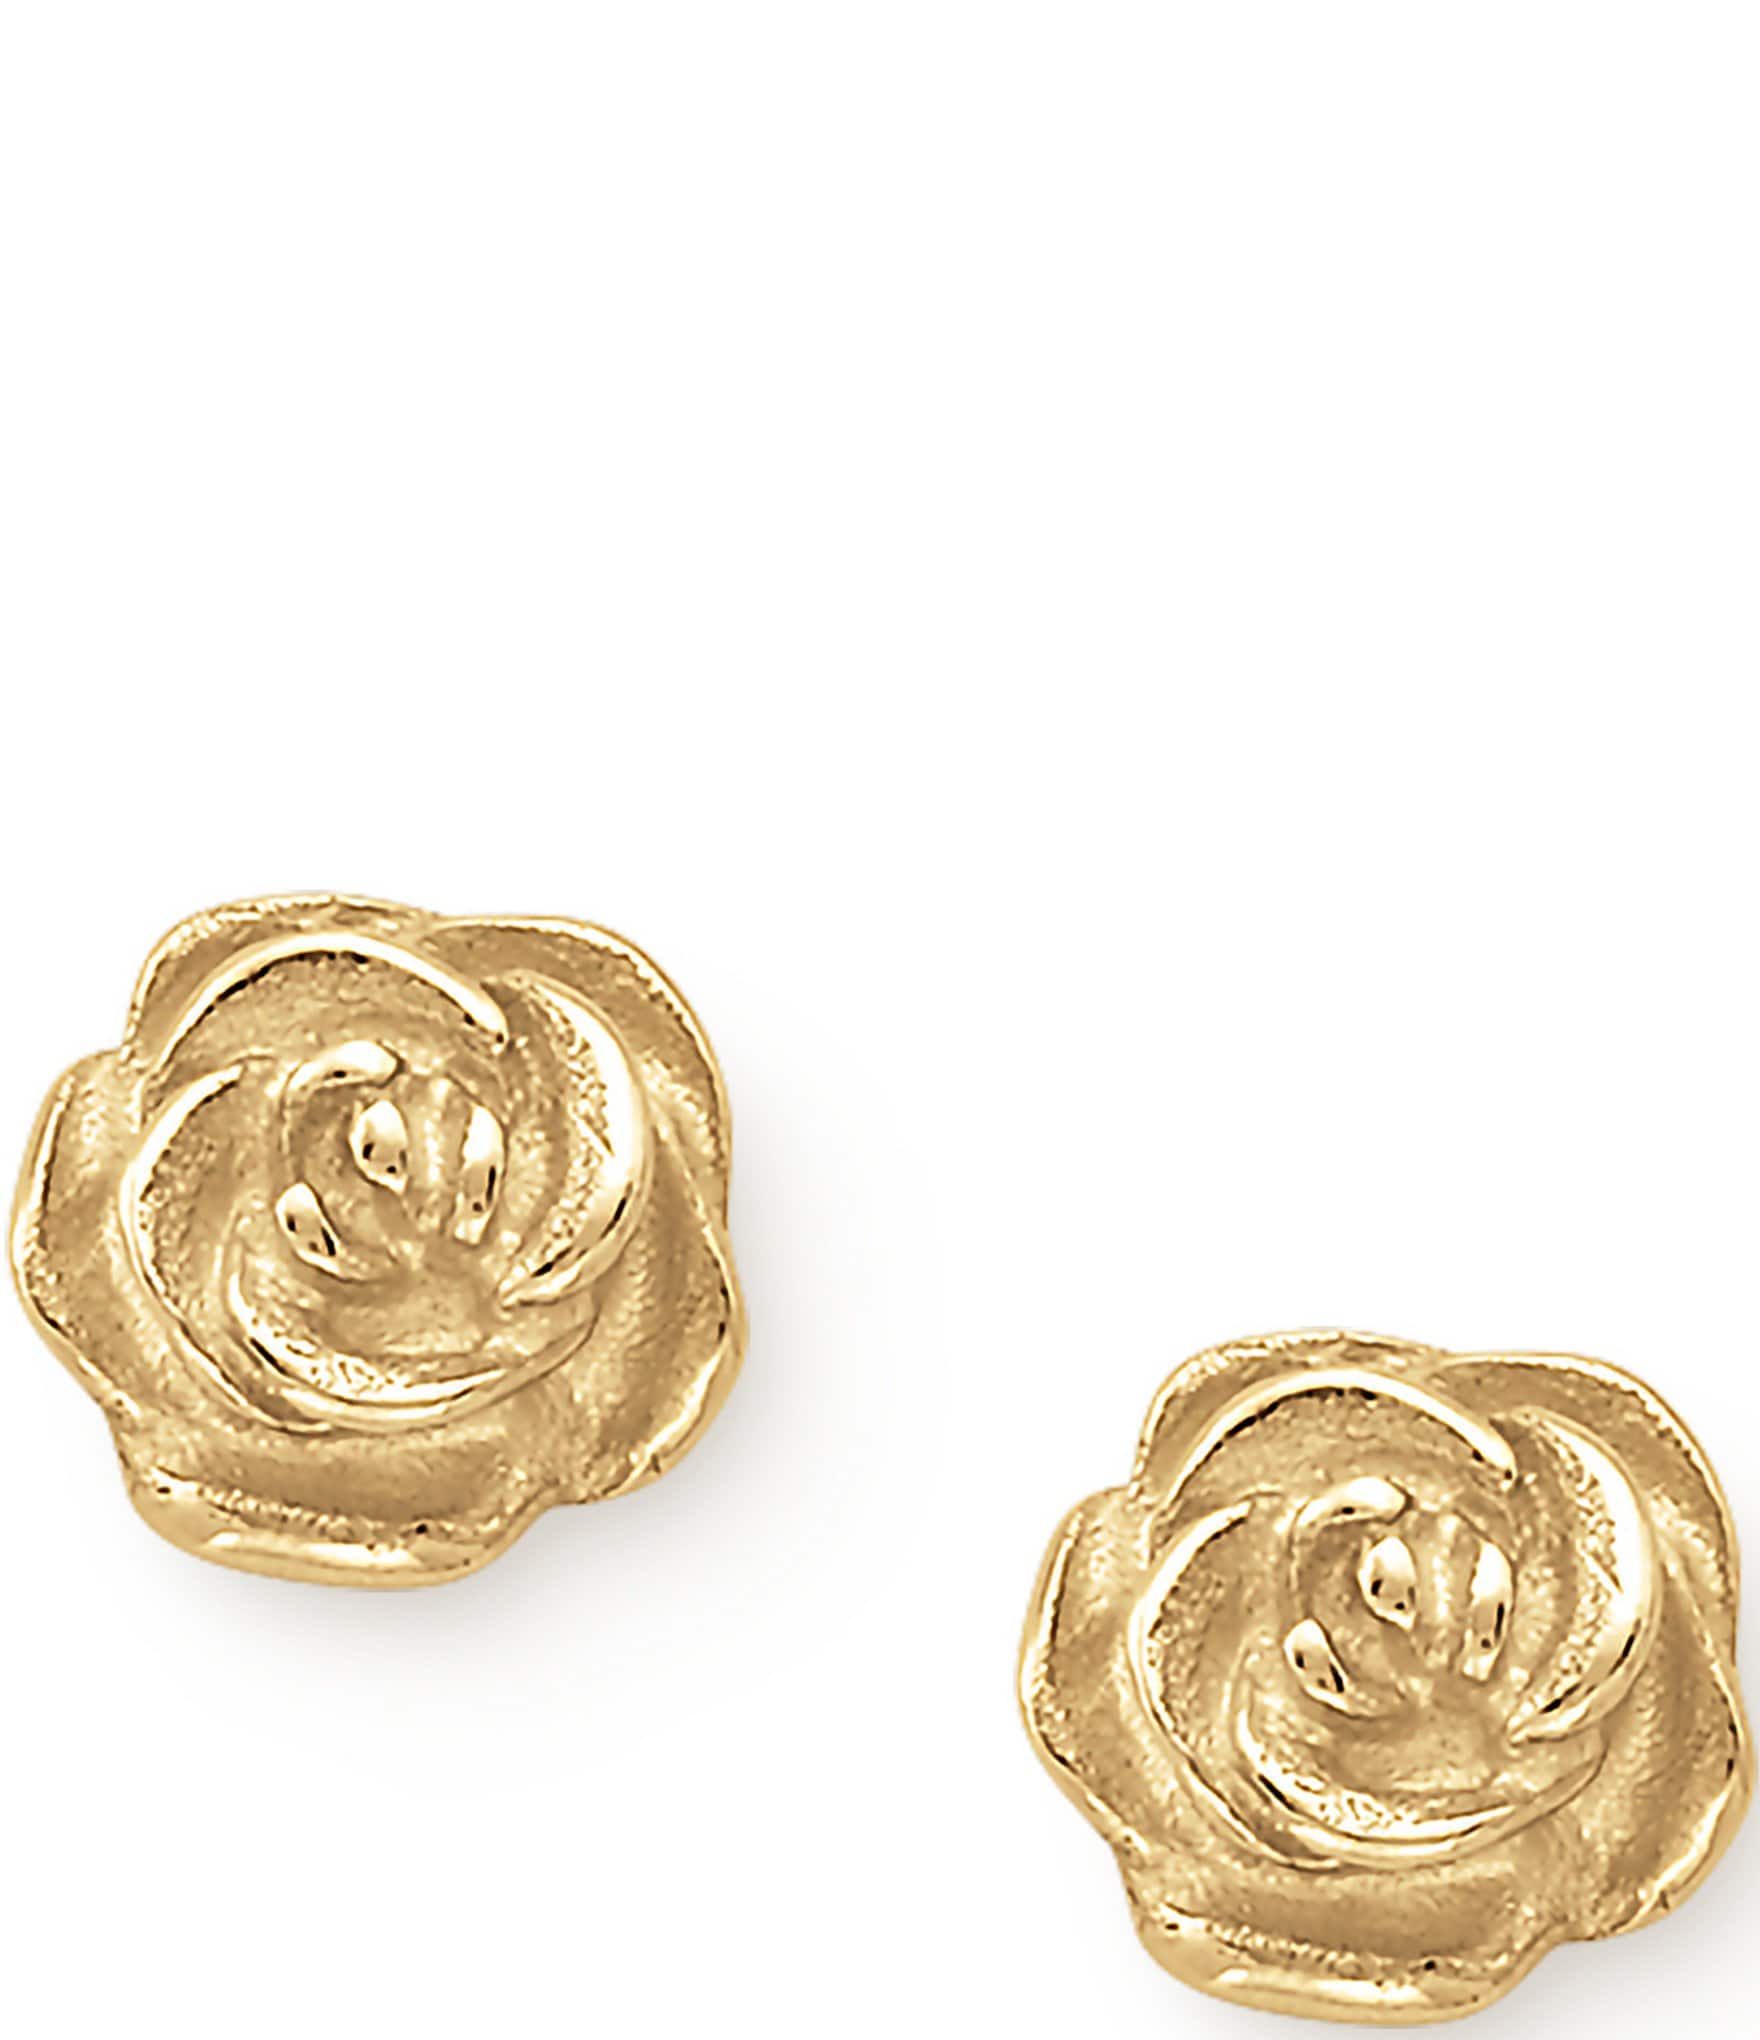 Rose Earrings James Avery | peacecommission.kdsg.gov.ng